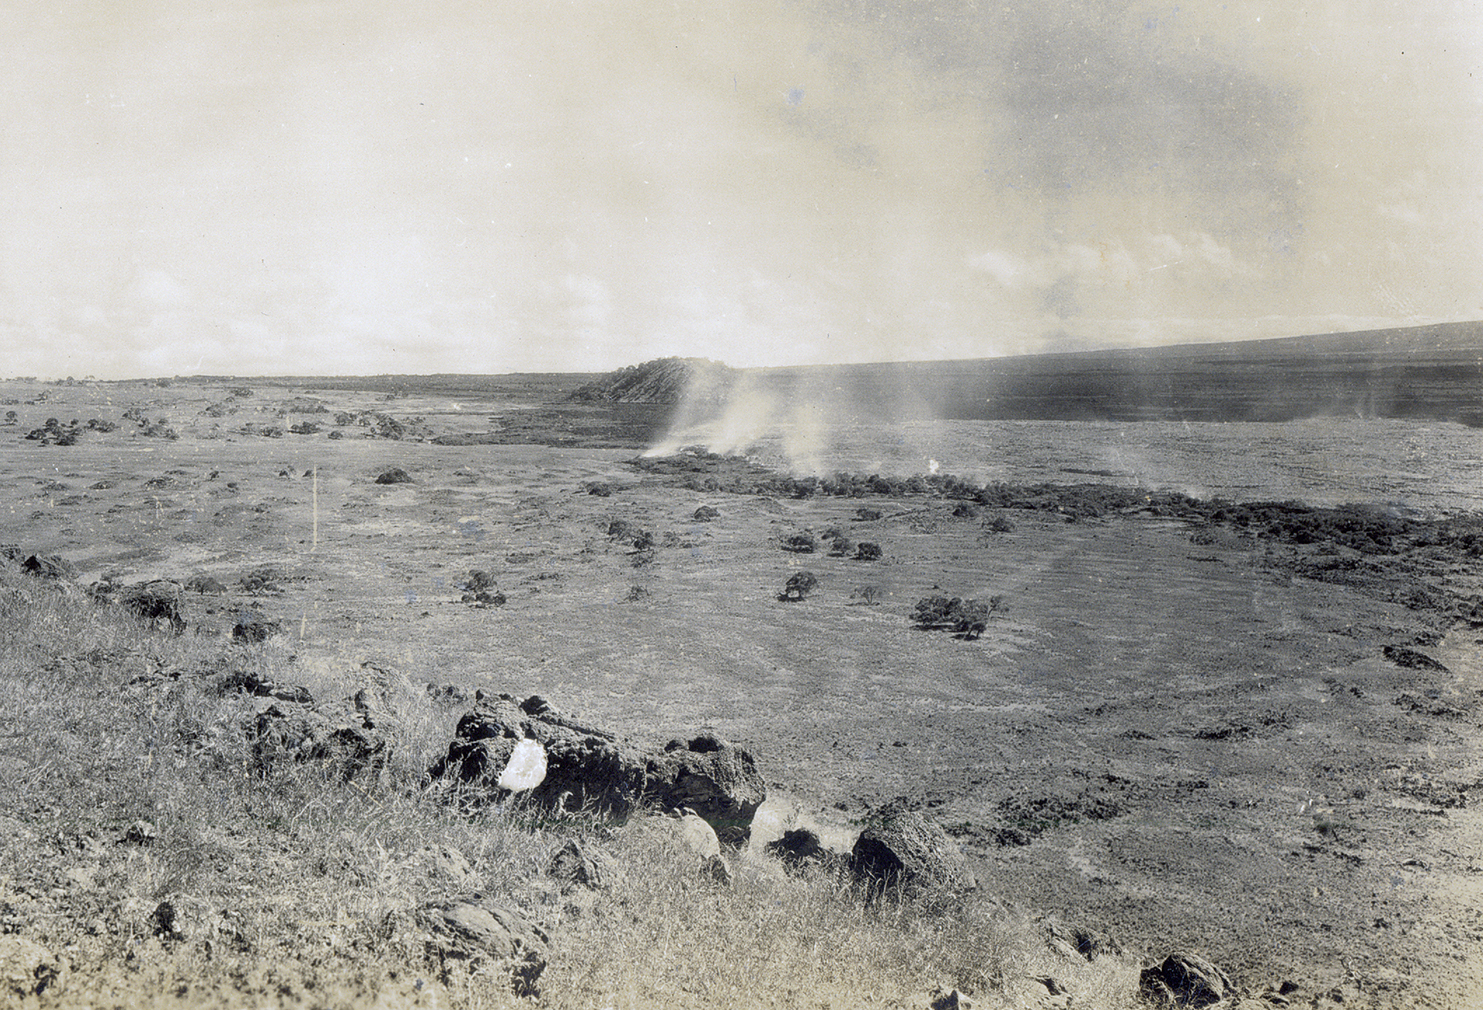 This photo, taken by Thomas Jaggar on December 21 during the1935 Mauna Loa eruption, shows the Humuula pāhoehoe flow ponding and slowly expanding eastward. The image looks east-southeast toward Puʻuhuluhulu from the southernmost Omaokoili cinder cone in the vicinity of today’s Saddle Road and Mauna Kea Access Road juncture. USGS photo.